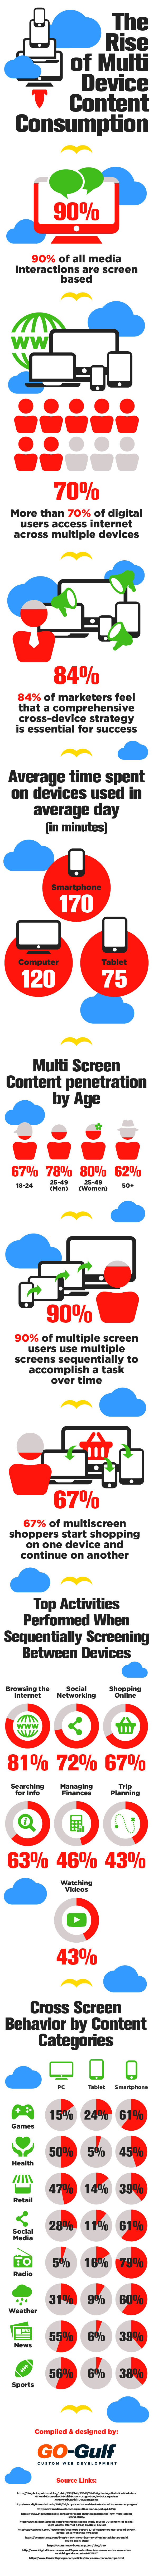 The Rise of Multi Device Content Consumption [Gifographic]